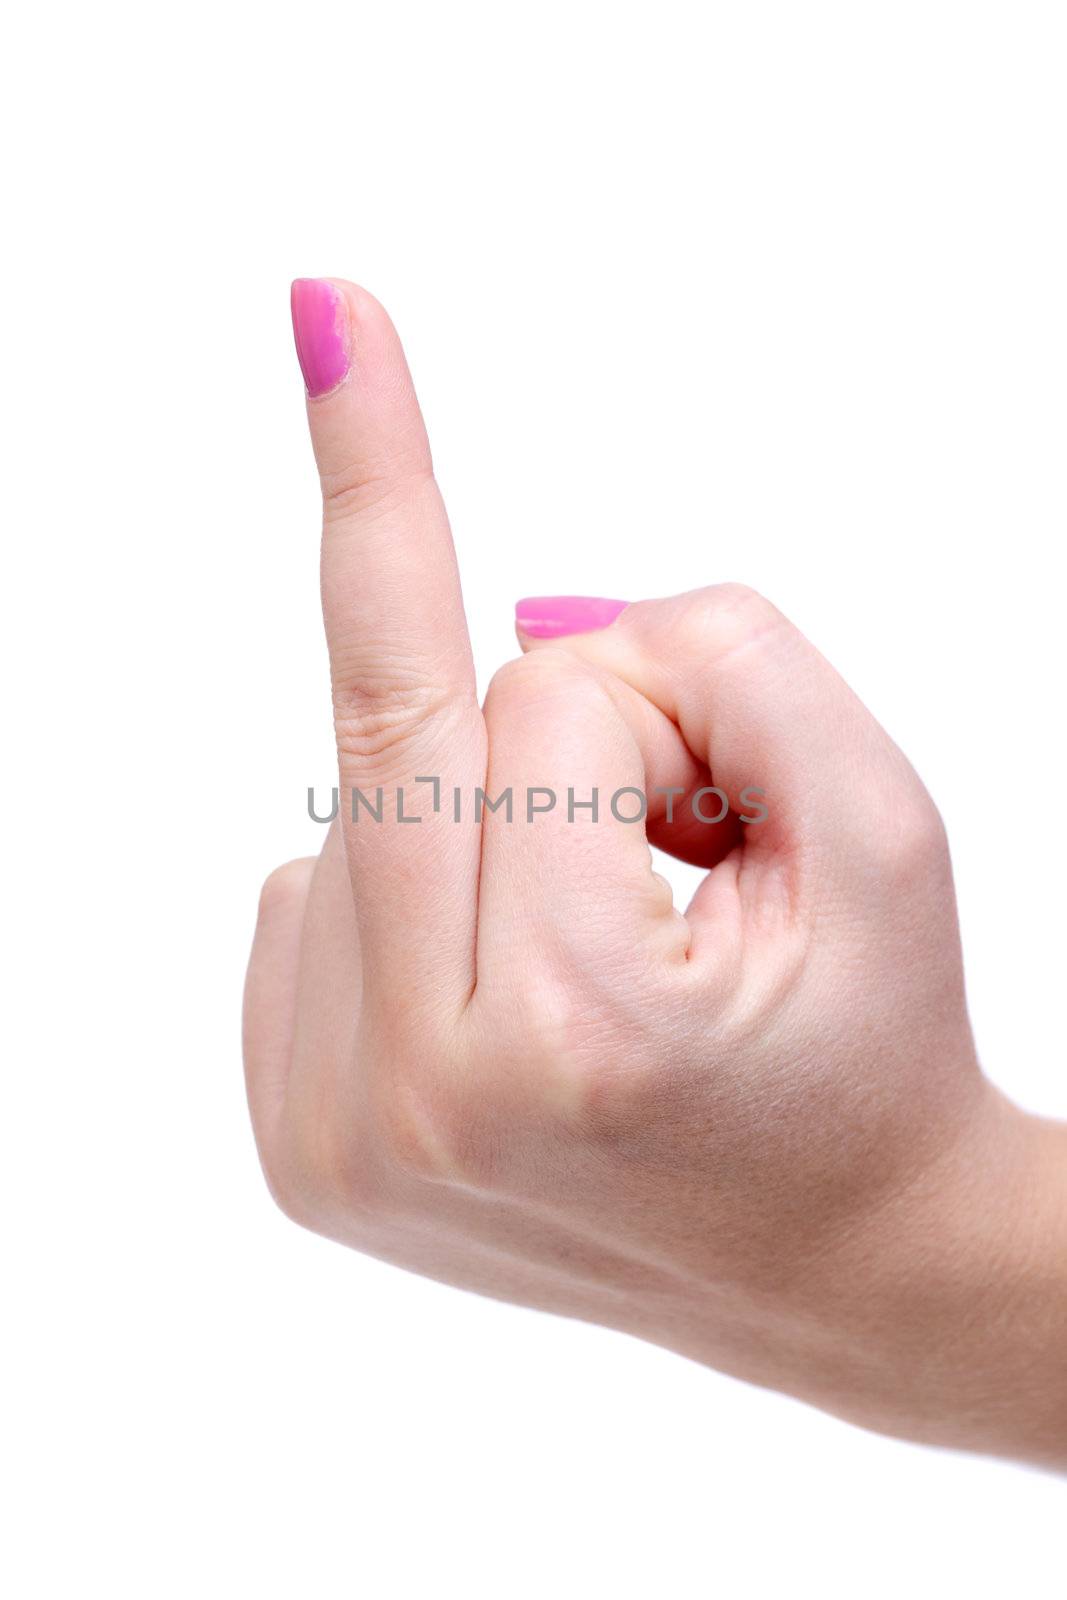 female hand with middle finger up by kokimk